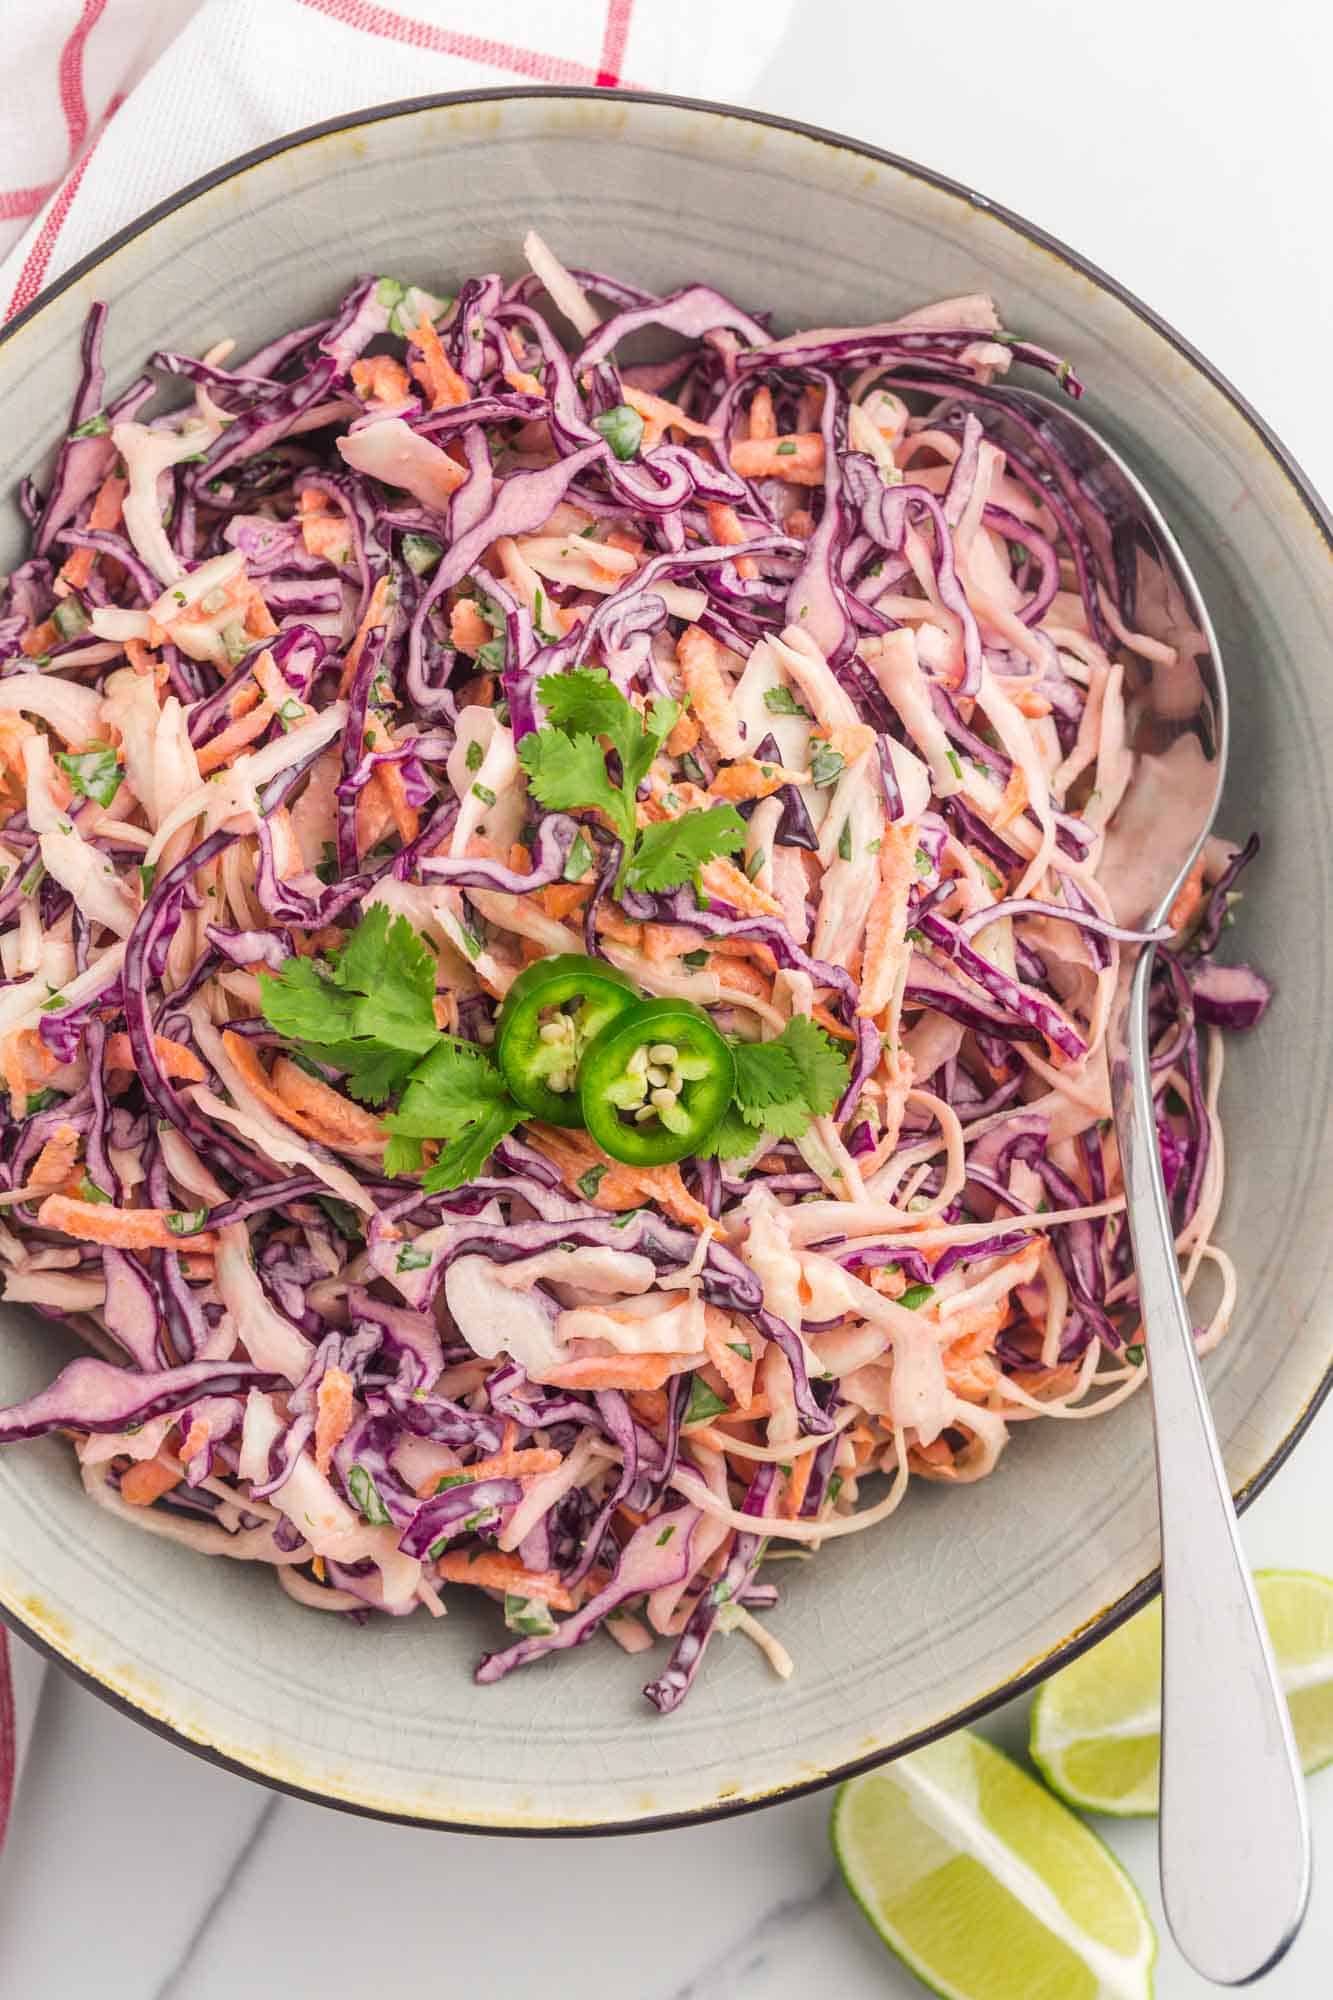 a white bowl filled with creamy cabbage slaw garnished with jalapeno slices and cilantro leaves